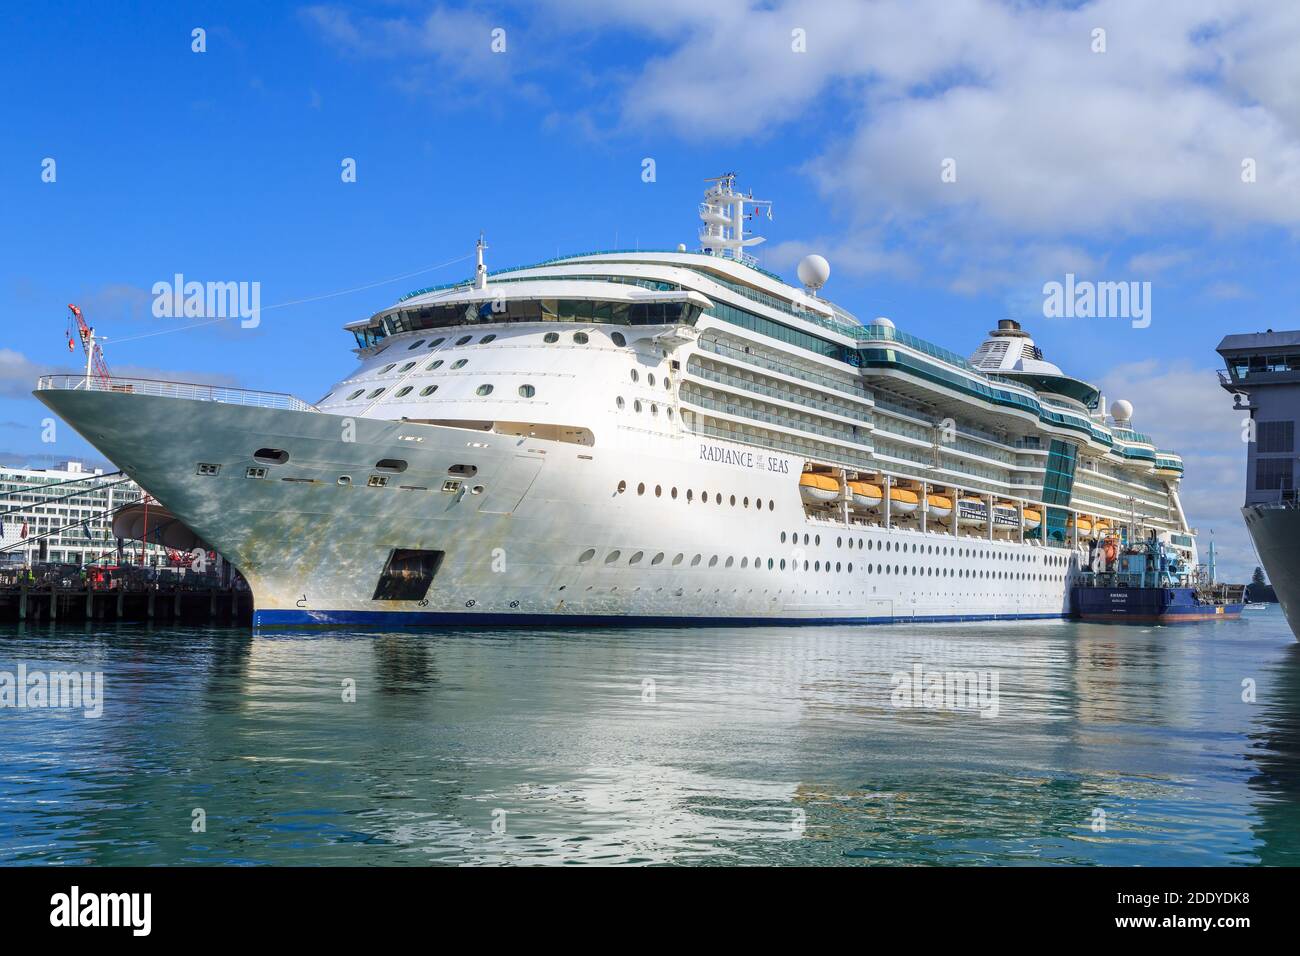 The Royal Caribbean cruise liner 'Radiance of the Seas' in Auckland Harbour with the oil tanker 'Awanuia' alongside Stock Photo